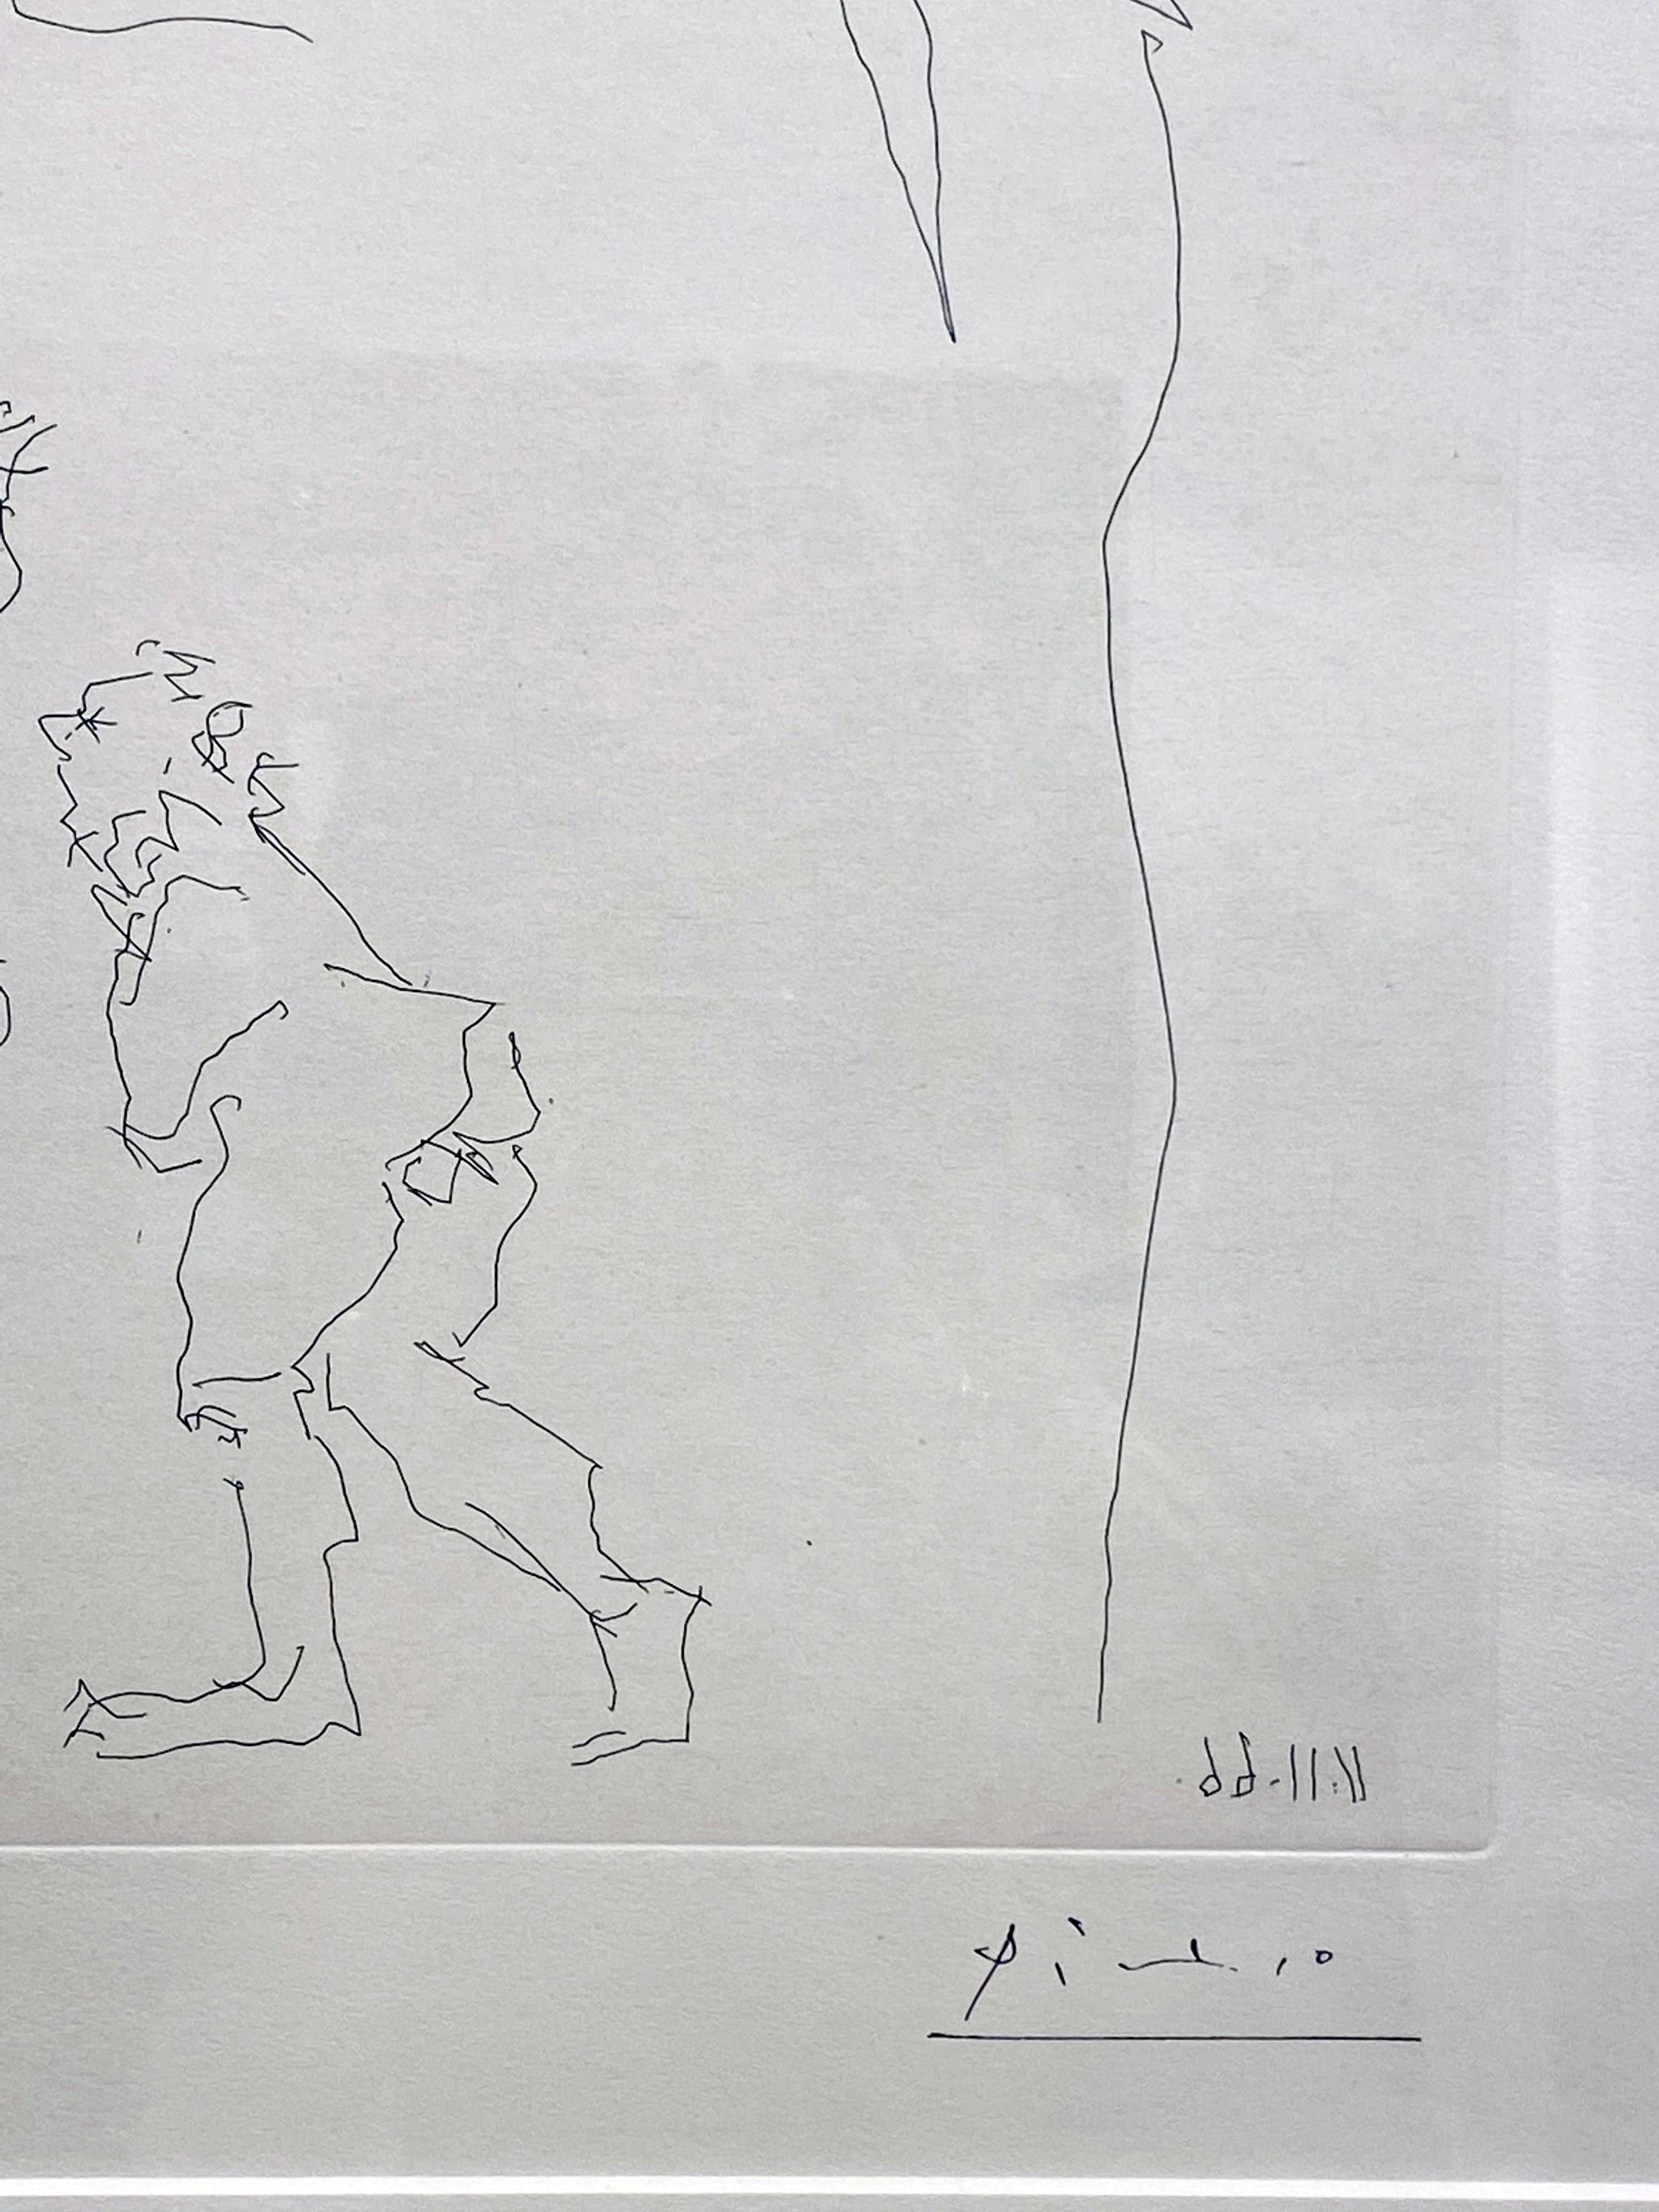 Artist:  Picasso, Pablo
Title:  Untitled (Bloch 1407)
Date:  1966
Medium:  Etching
Unframed Dimensions:  12.6